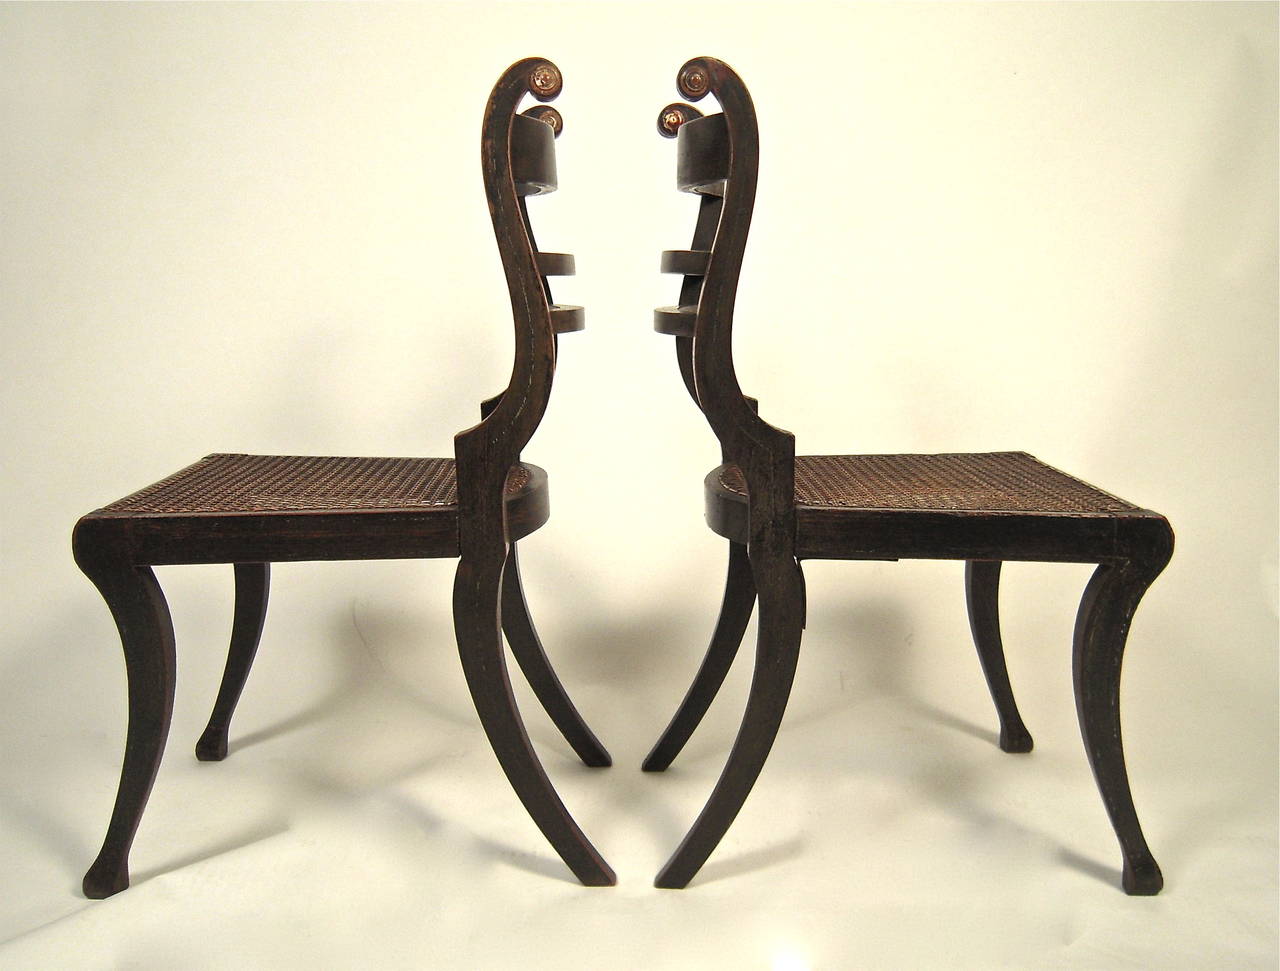 A pair of wonderfully sculptural English Regency period Trafalgar chairs, painted black with grain painted panels and traces of gilded and white pinstripe decoration, the exaggerated scrolled backs with curved slats over caned seats supported by